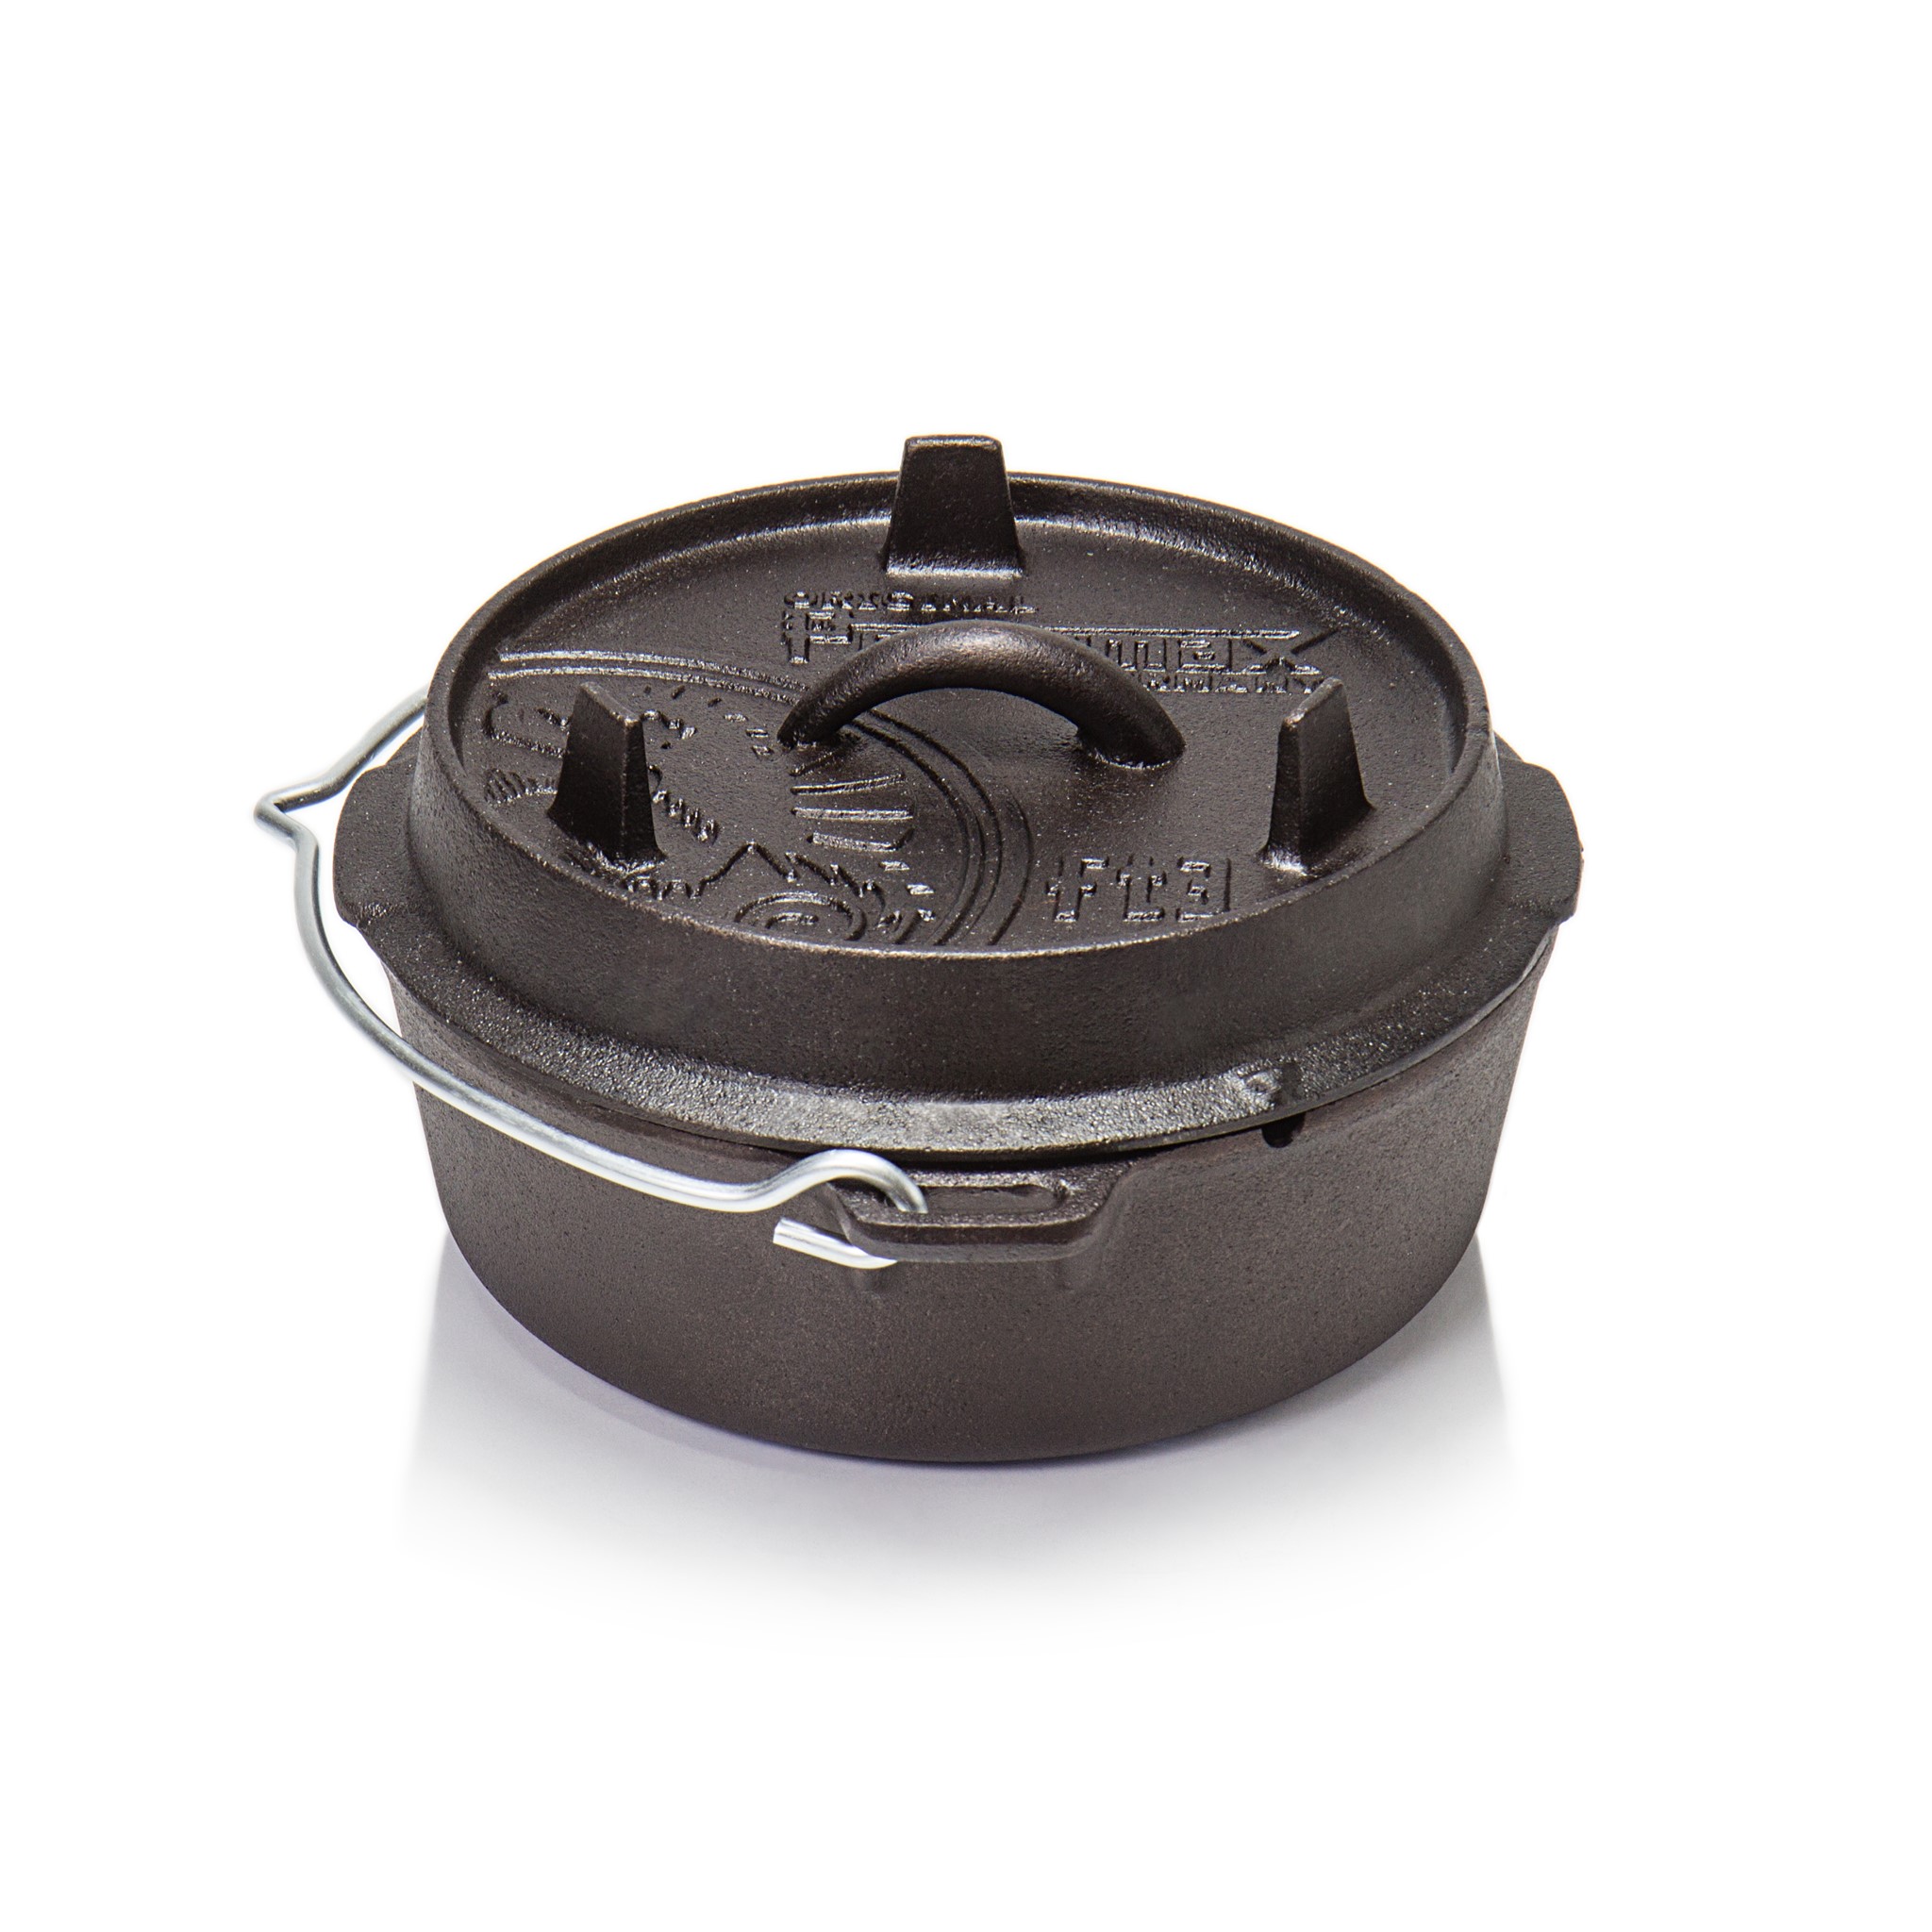 Picture of Petromax - Dutch Oven FT3 Fire Pot 1.6 Liter (without feet)